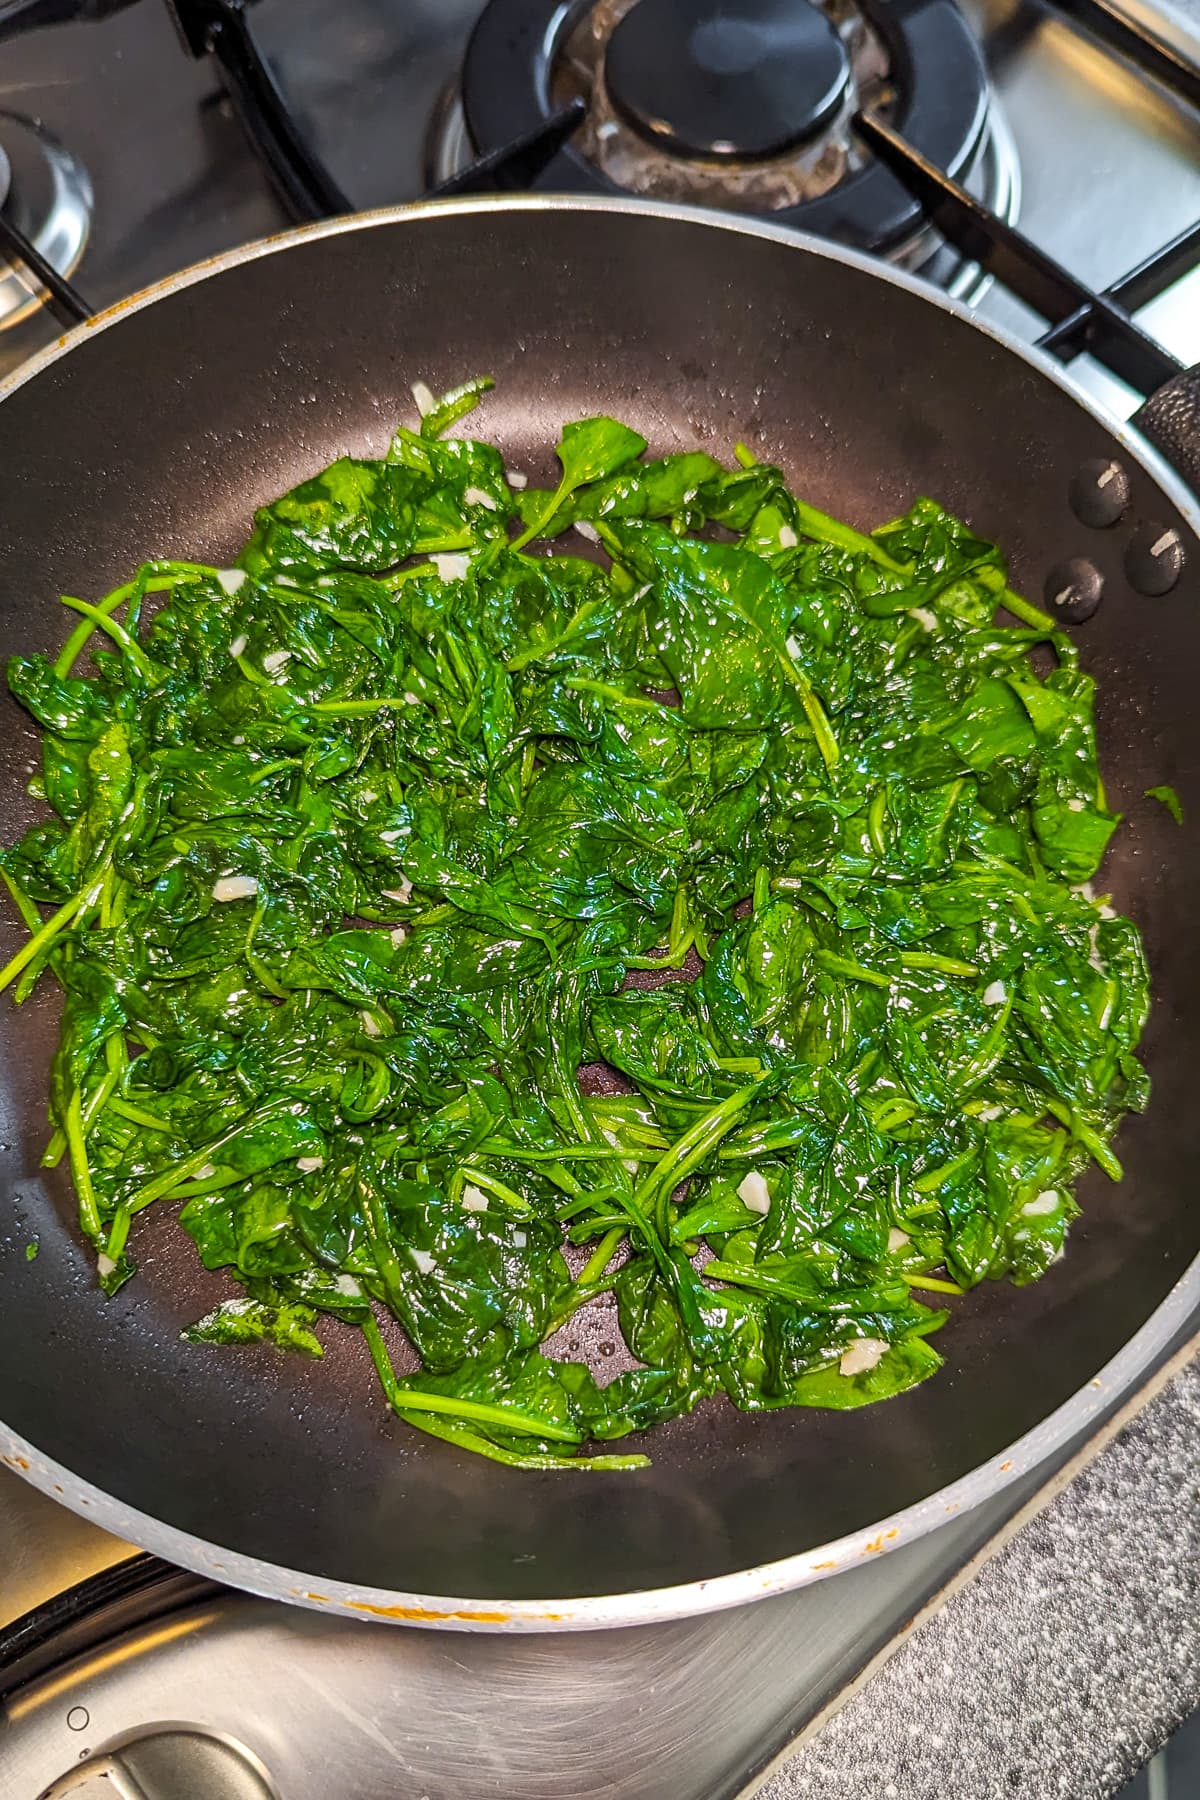 Cooked spinach in a frying pan on the stove.